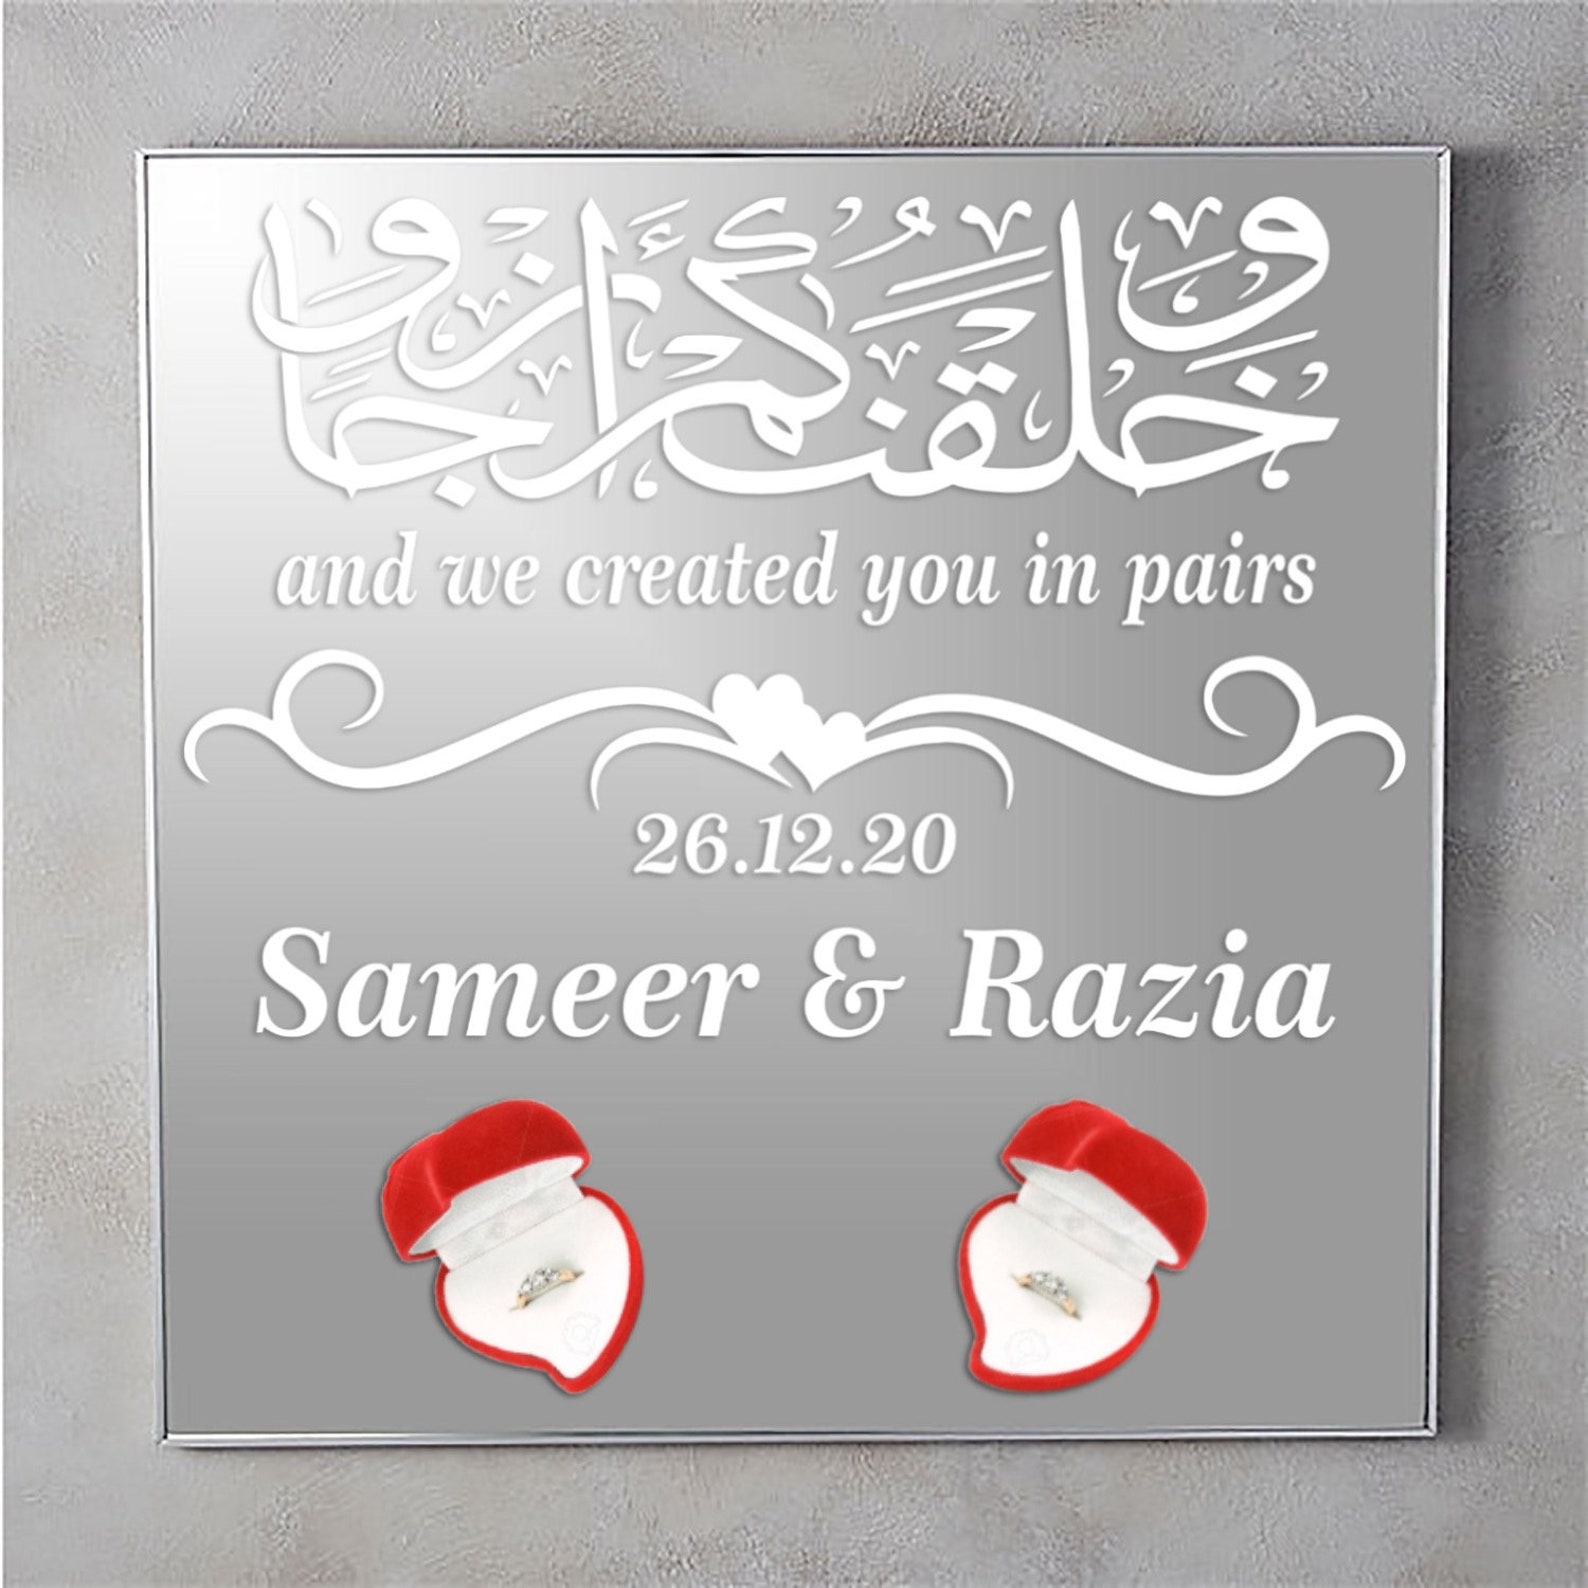 Personalised And we created you in pairs Islamic Calligraphy | Etsy